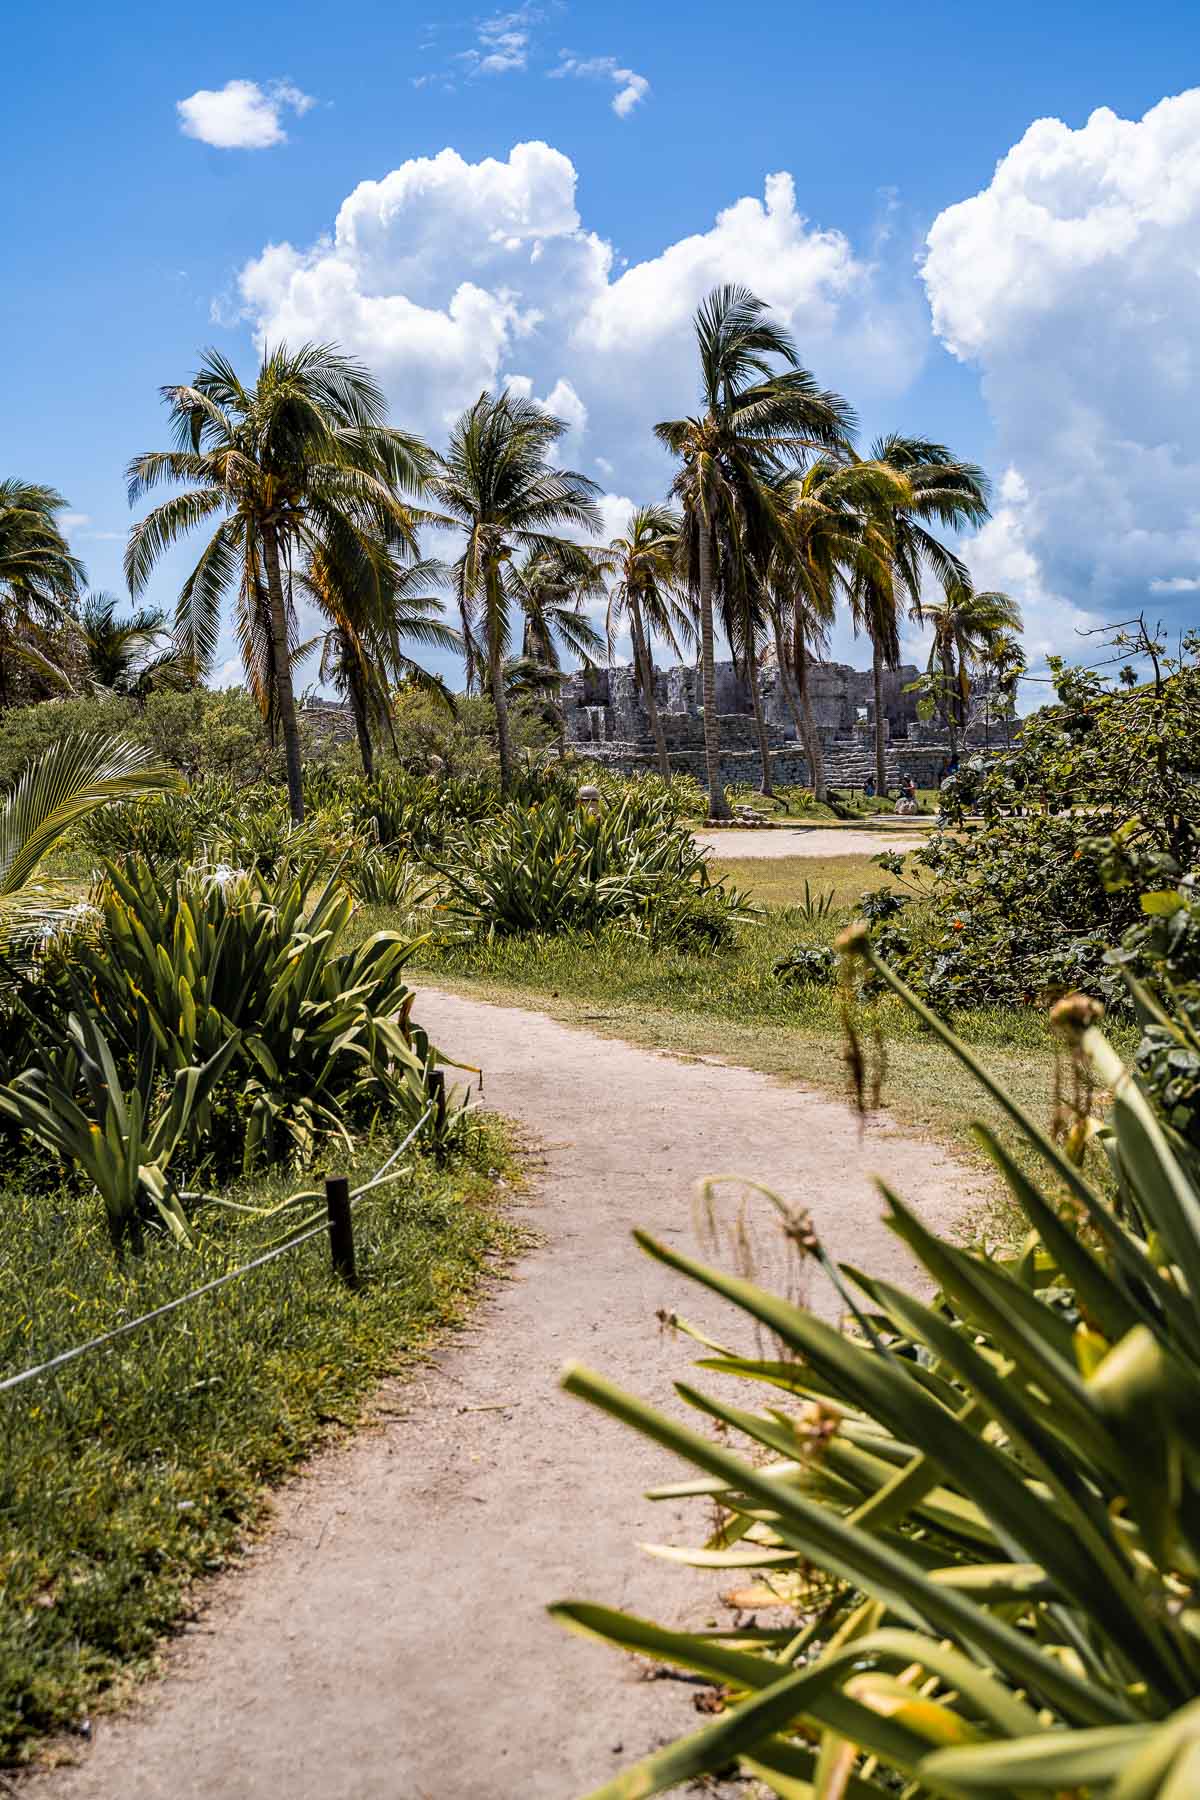 Green palm trees at the Tulum ruins